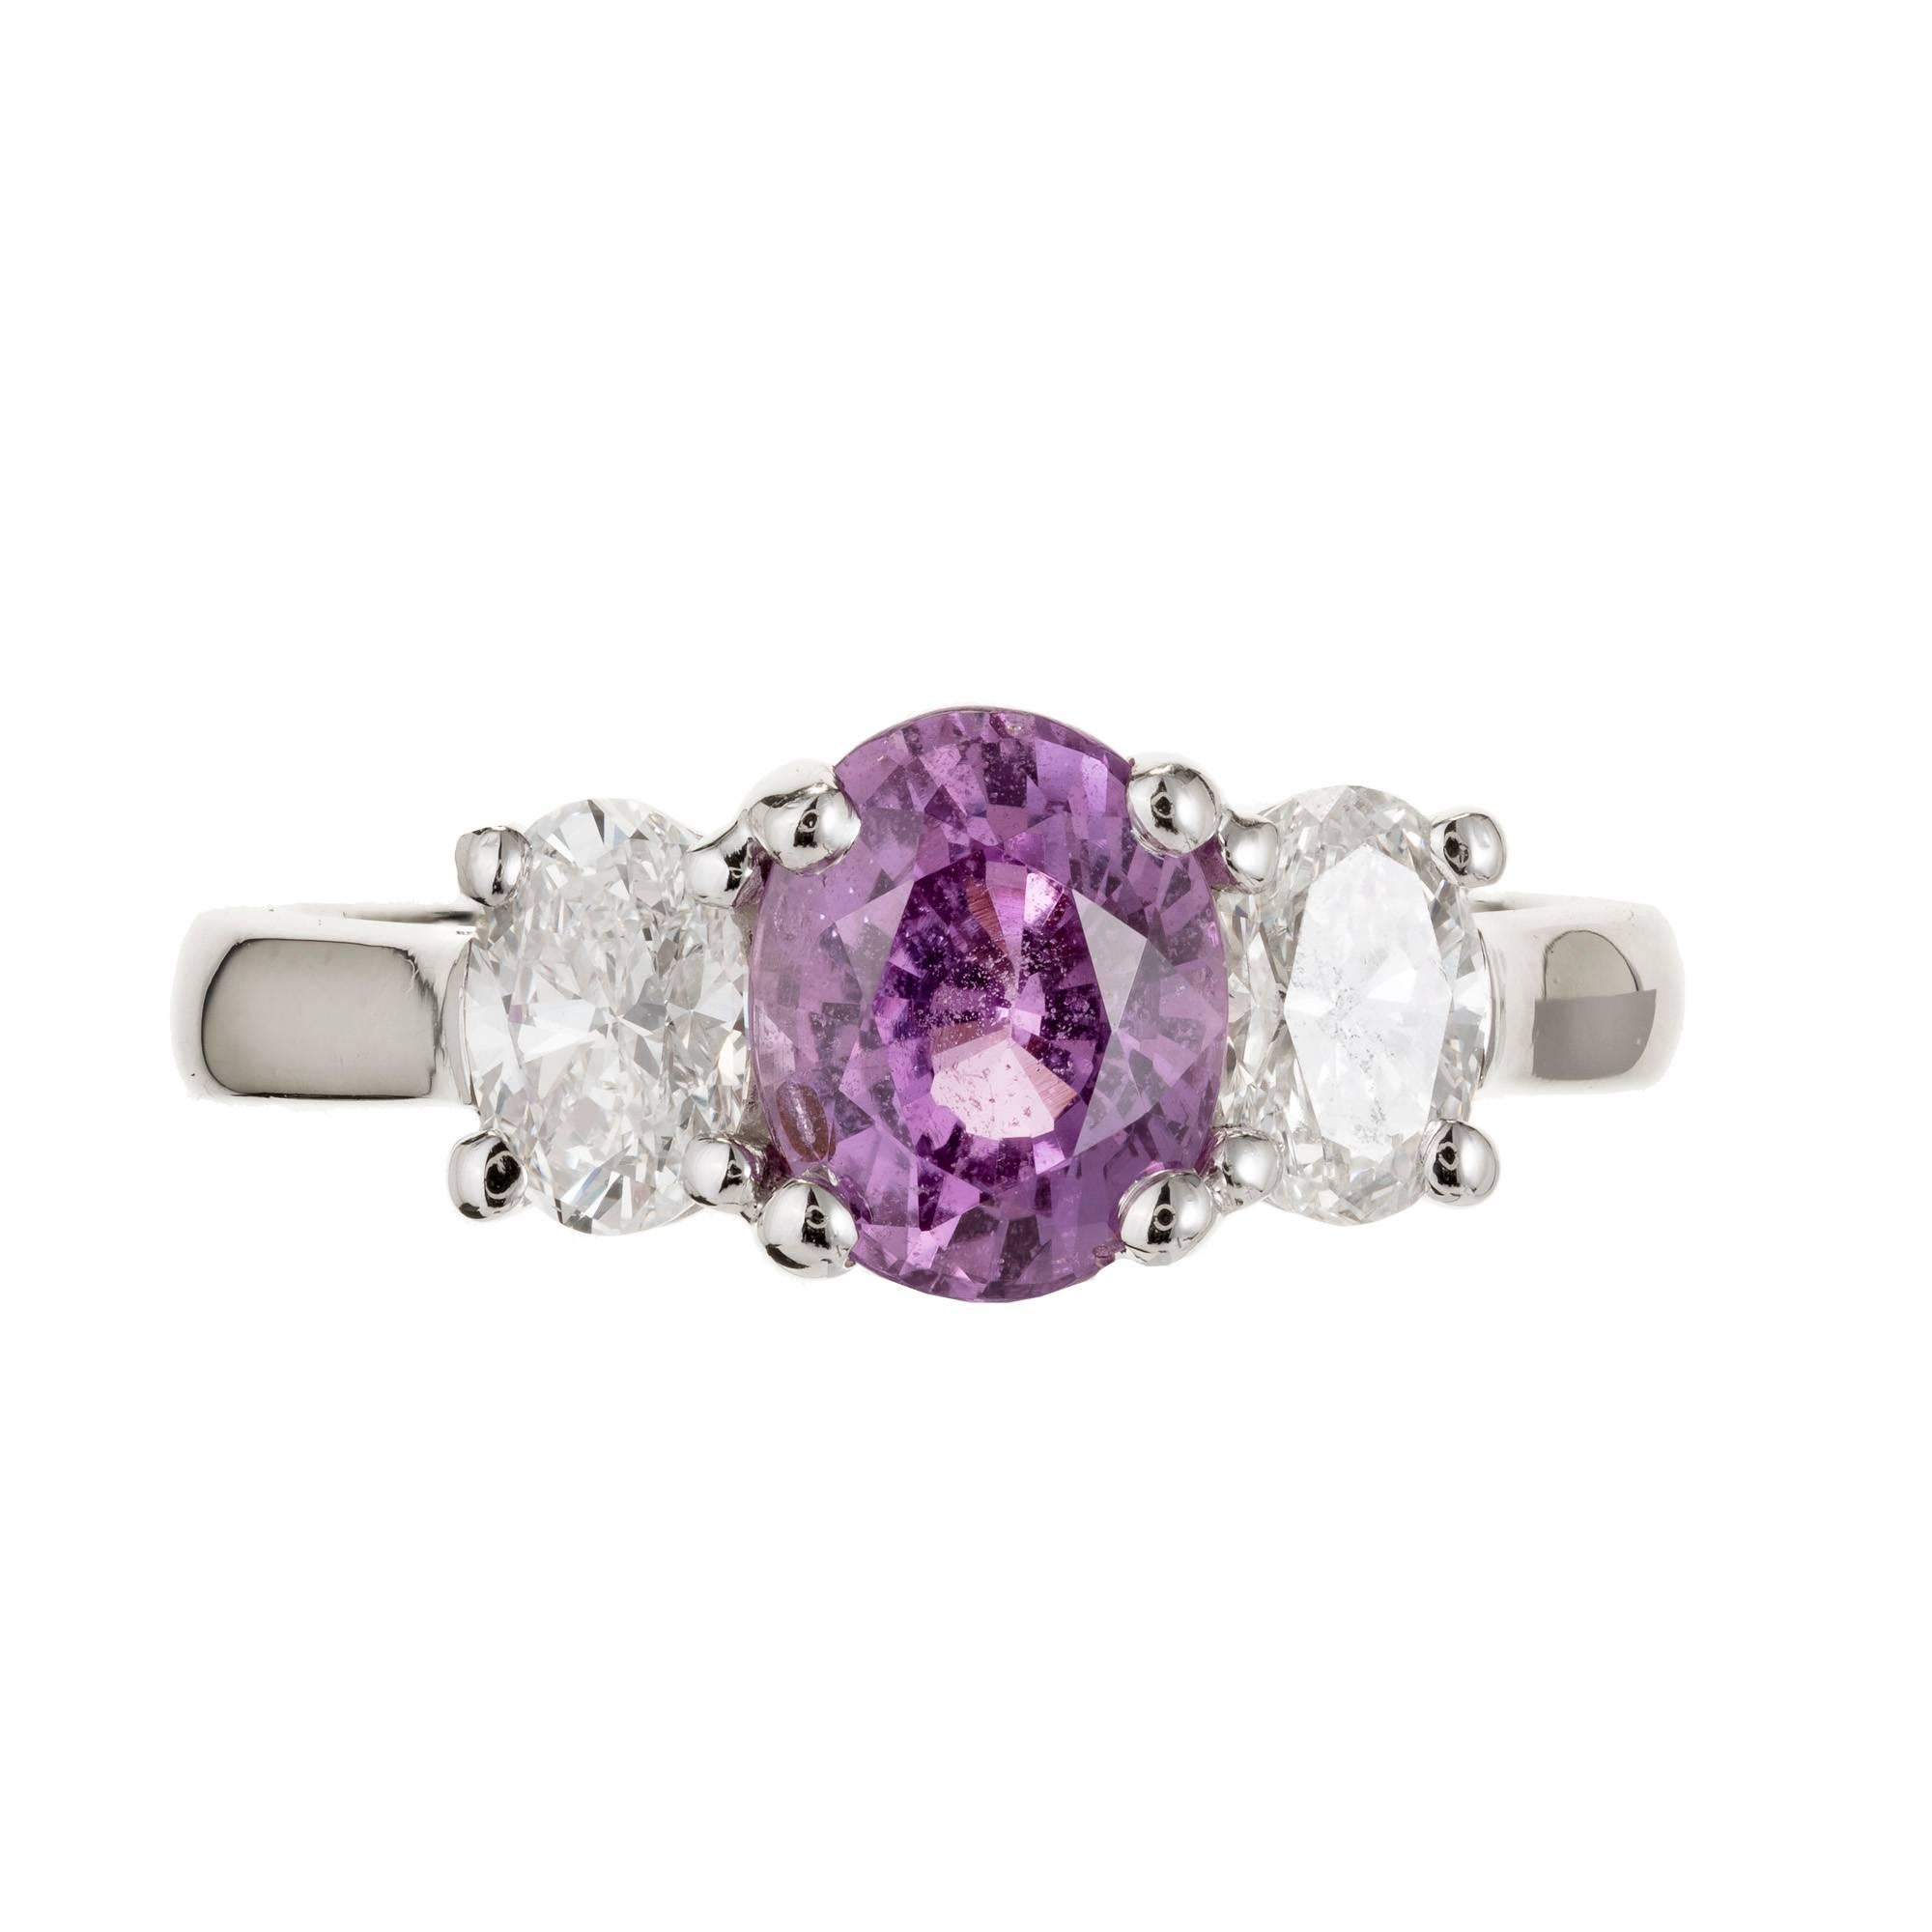 Peter Suchy natural no heat GIA certified purplish pink oval Sapphire set in a three-stone platinum setting with two oval side diamonds. 

Platinum
1 oval purplish pink Sapphire, approx. total weight 1.82cts, 7.99 x 6.35 x 4.43mm, GIA certificate